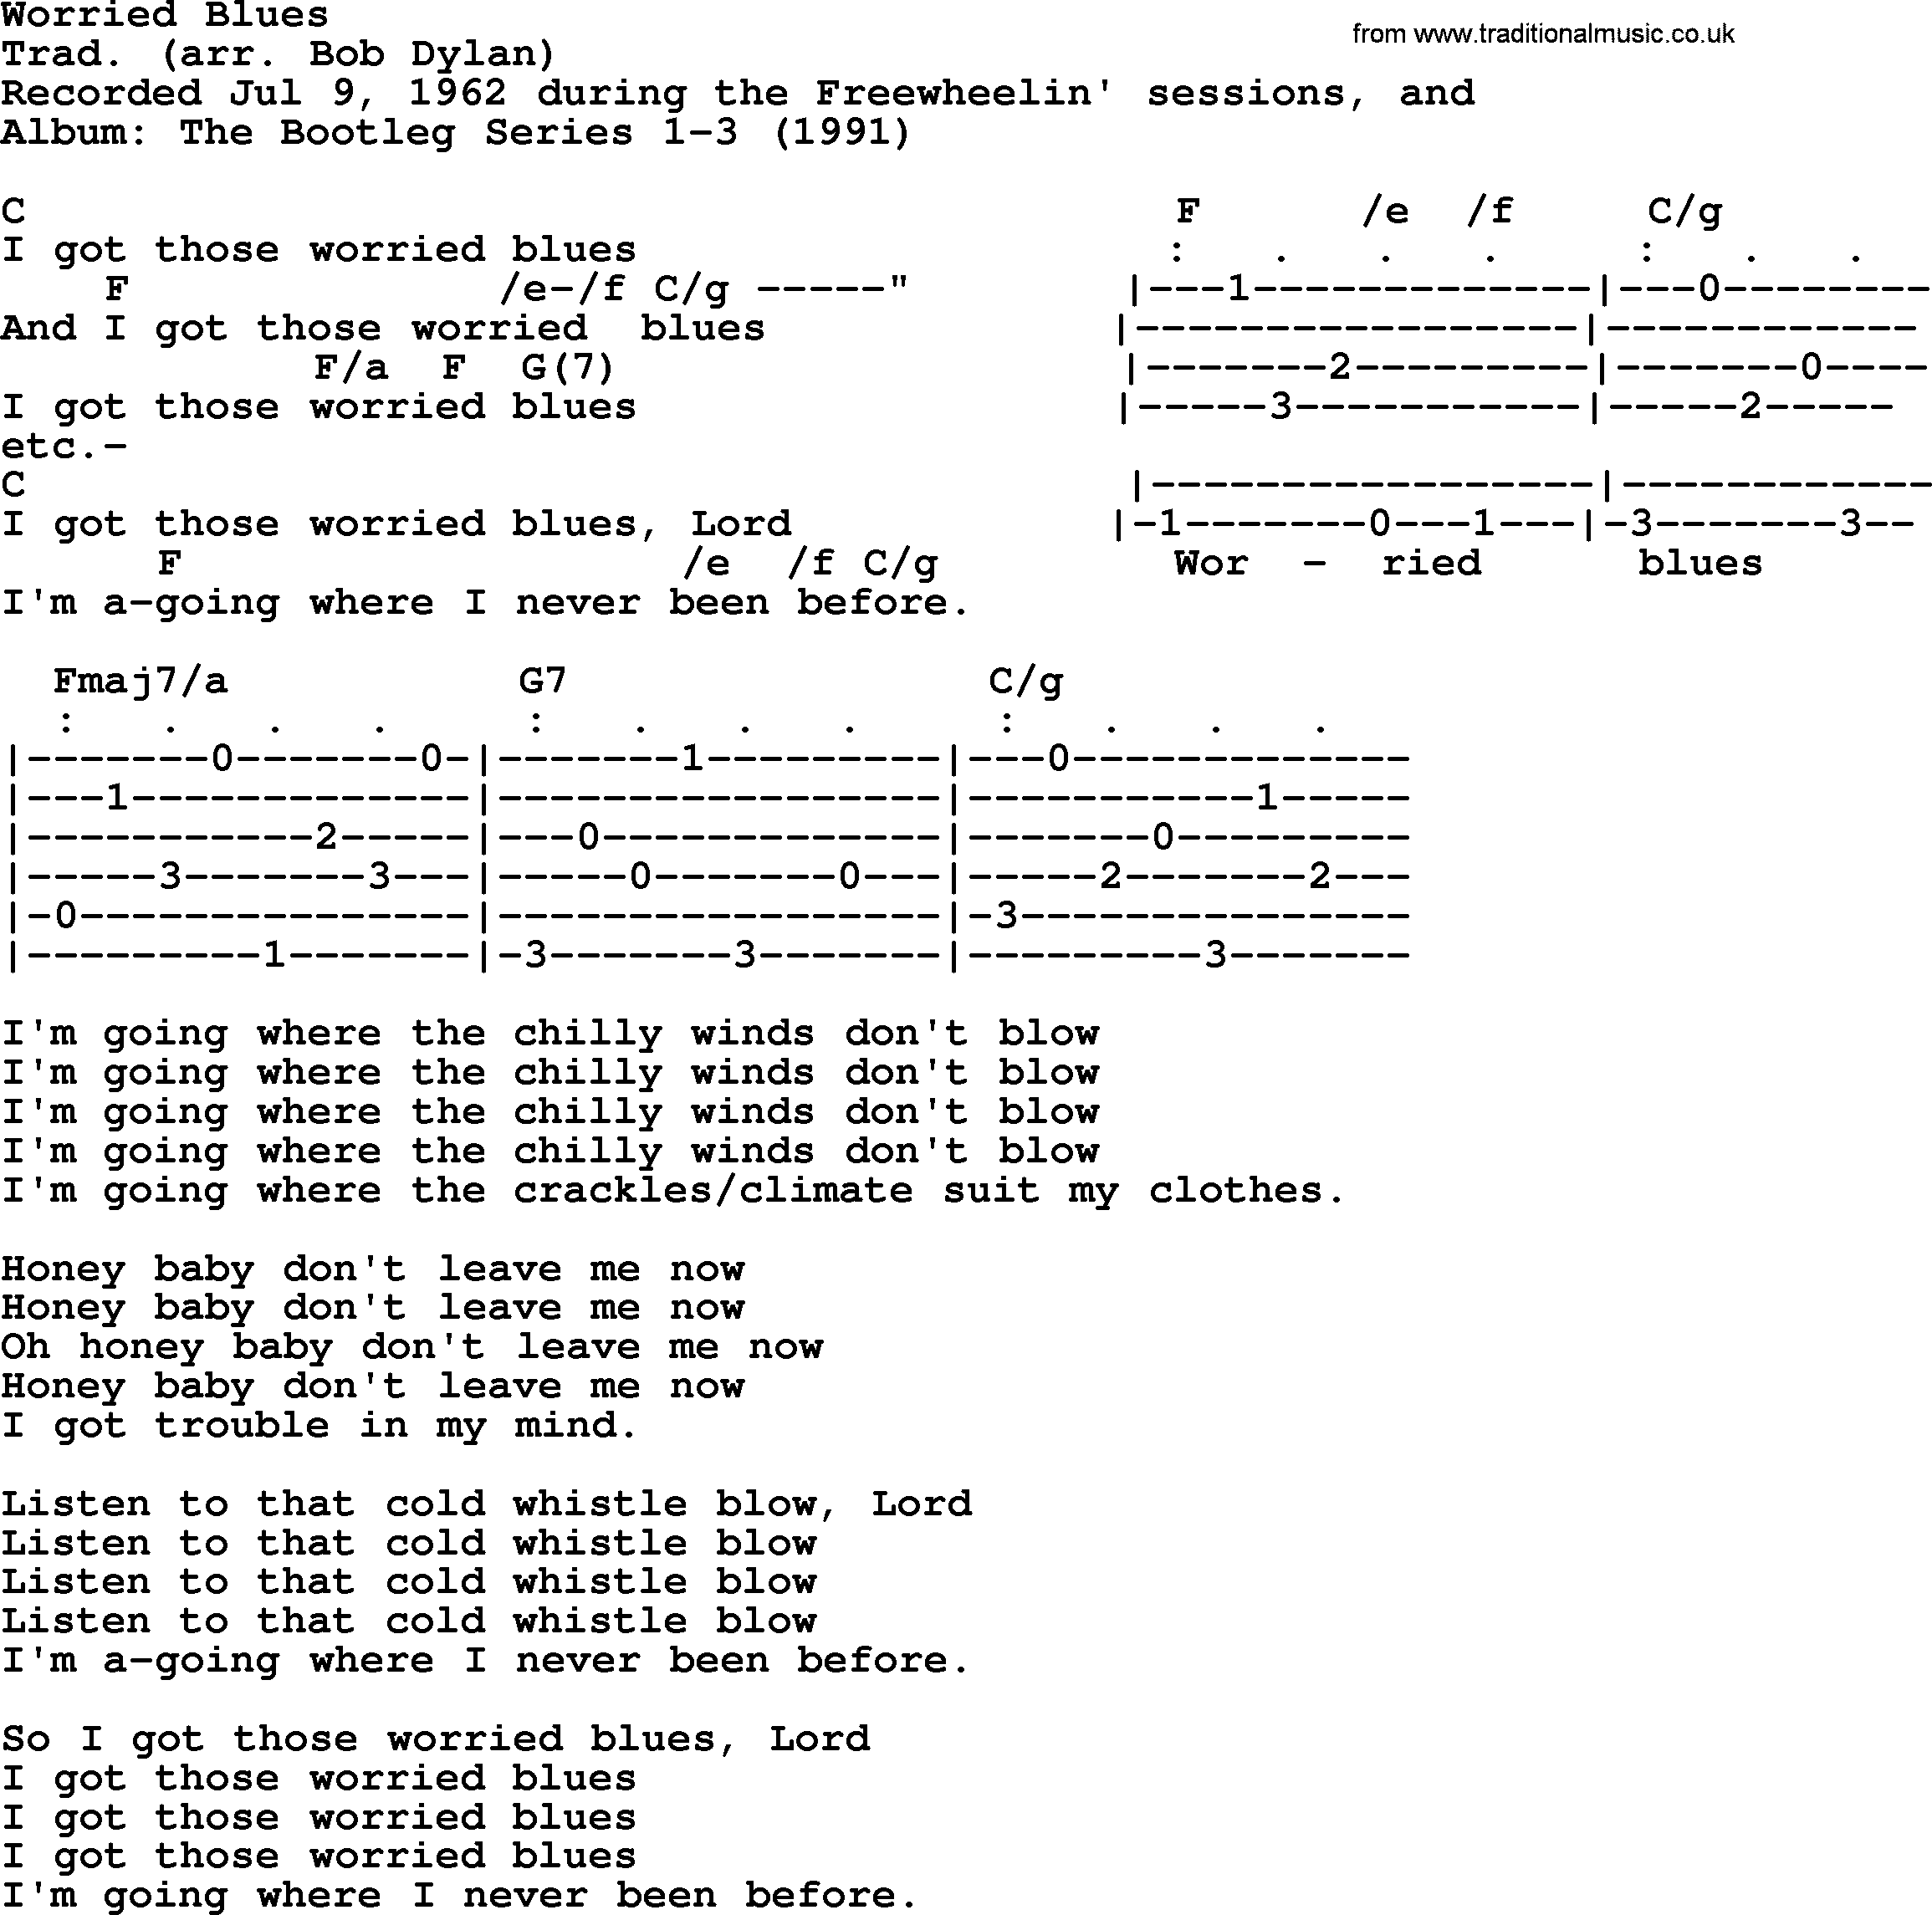 Bob Dylan song, lyrics with chords - Worried Blues